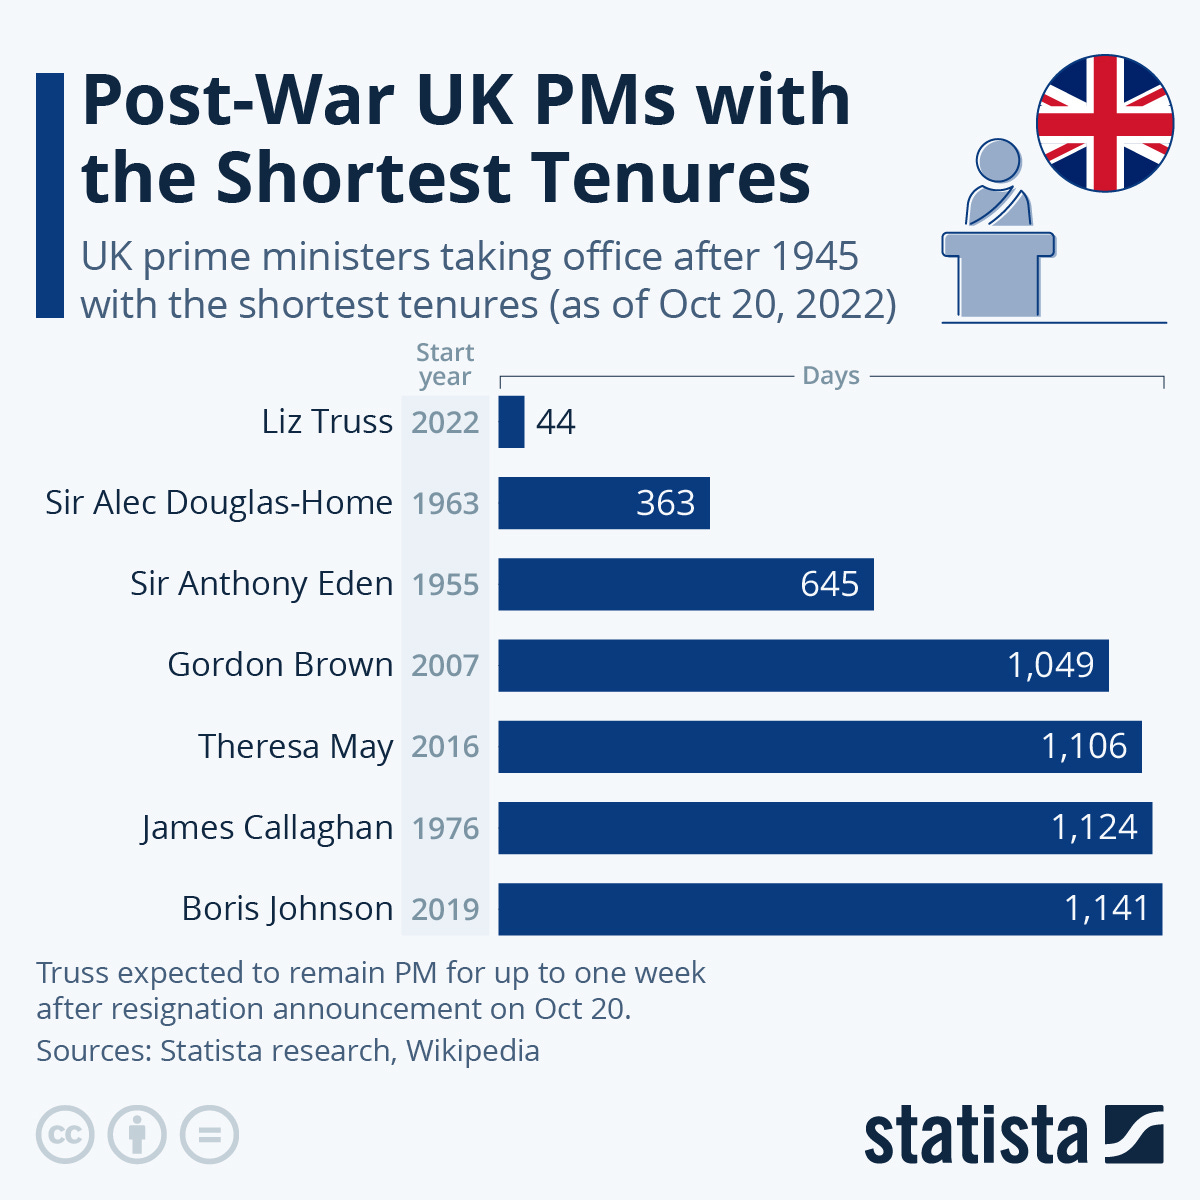 This chart shows the UK prime ministers taking office after 1945 with the shortest tenures, as of October 20th, 2022. Liz Truss, who took office this year, tops the list at 44 days. She is followed by Sir Alec Douglas-Home who took office in 1963 and lasted 363 days, Sir Anthony Eden (1955 and 645 days), Gordon Brown (2007 and 1,049 days), Theresa May (2016 and 1,106 days), James Callaghan (1976 and 1,124 days), and Boris Johnson (2019 and 1,141 days).